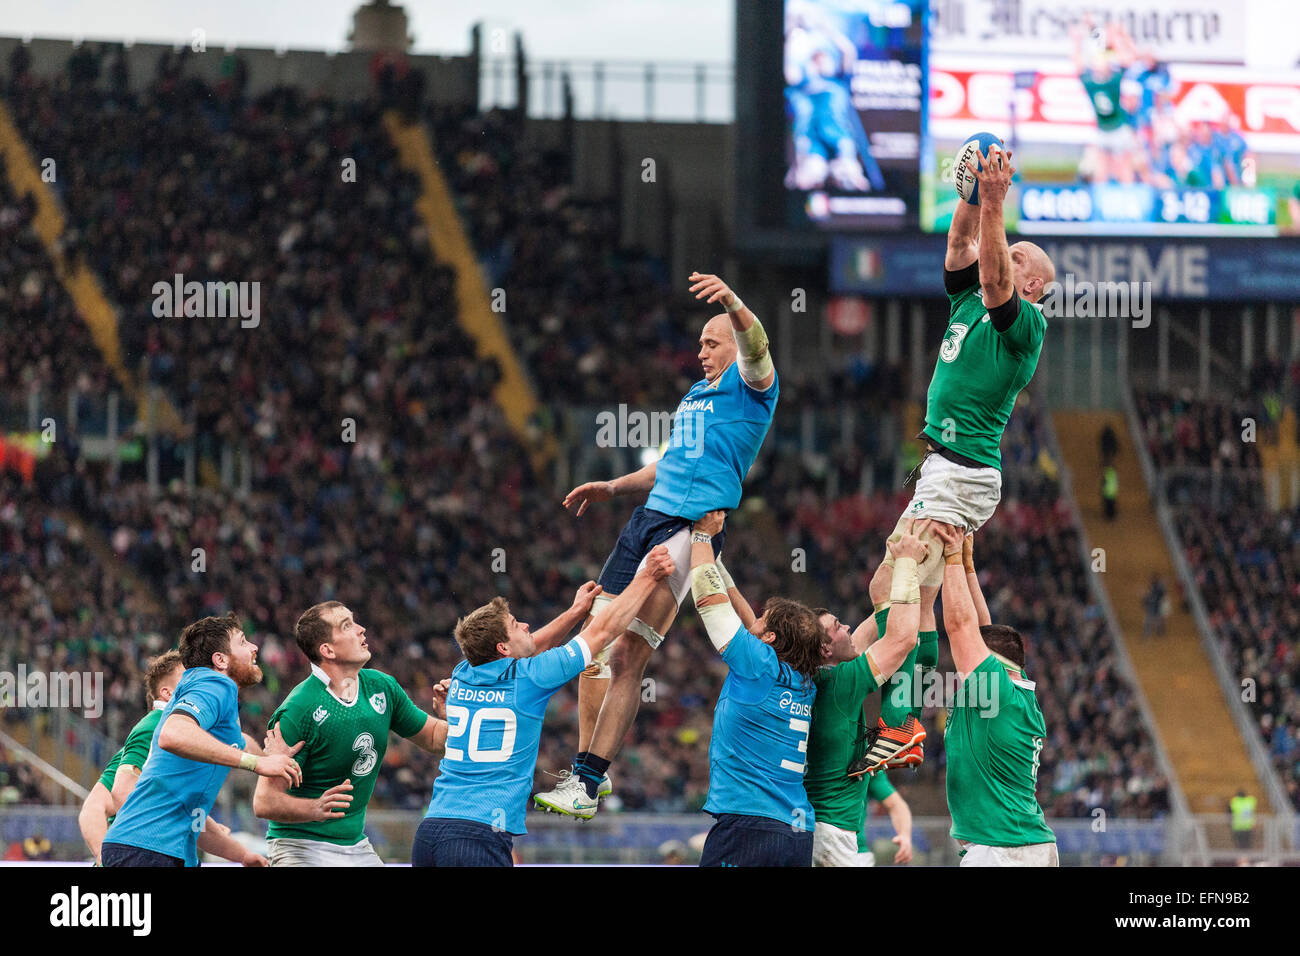 Rome, Italy. 07th Feb, 2015. Ireland's captain Paul O'Connell takes the ball in the line-out while Italian captain Sergio Parisse misses out., Stadio Olimpico, Rome, Italy. 2/7/15 Credit:  Stephen Bisgrove/Alamy Live News Stock Photo